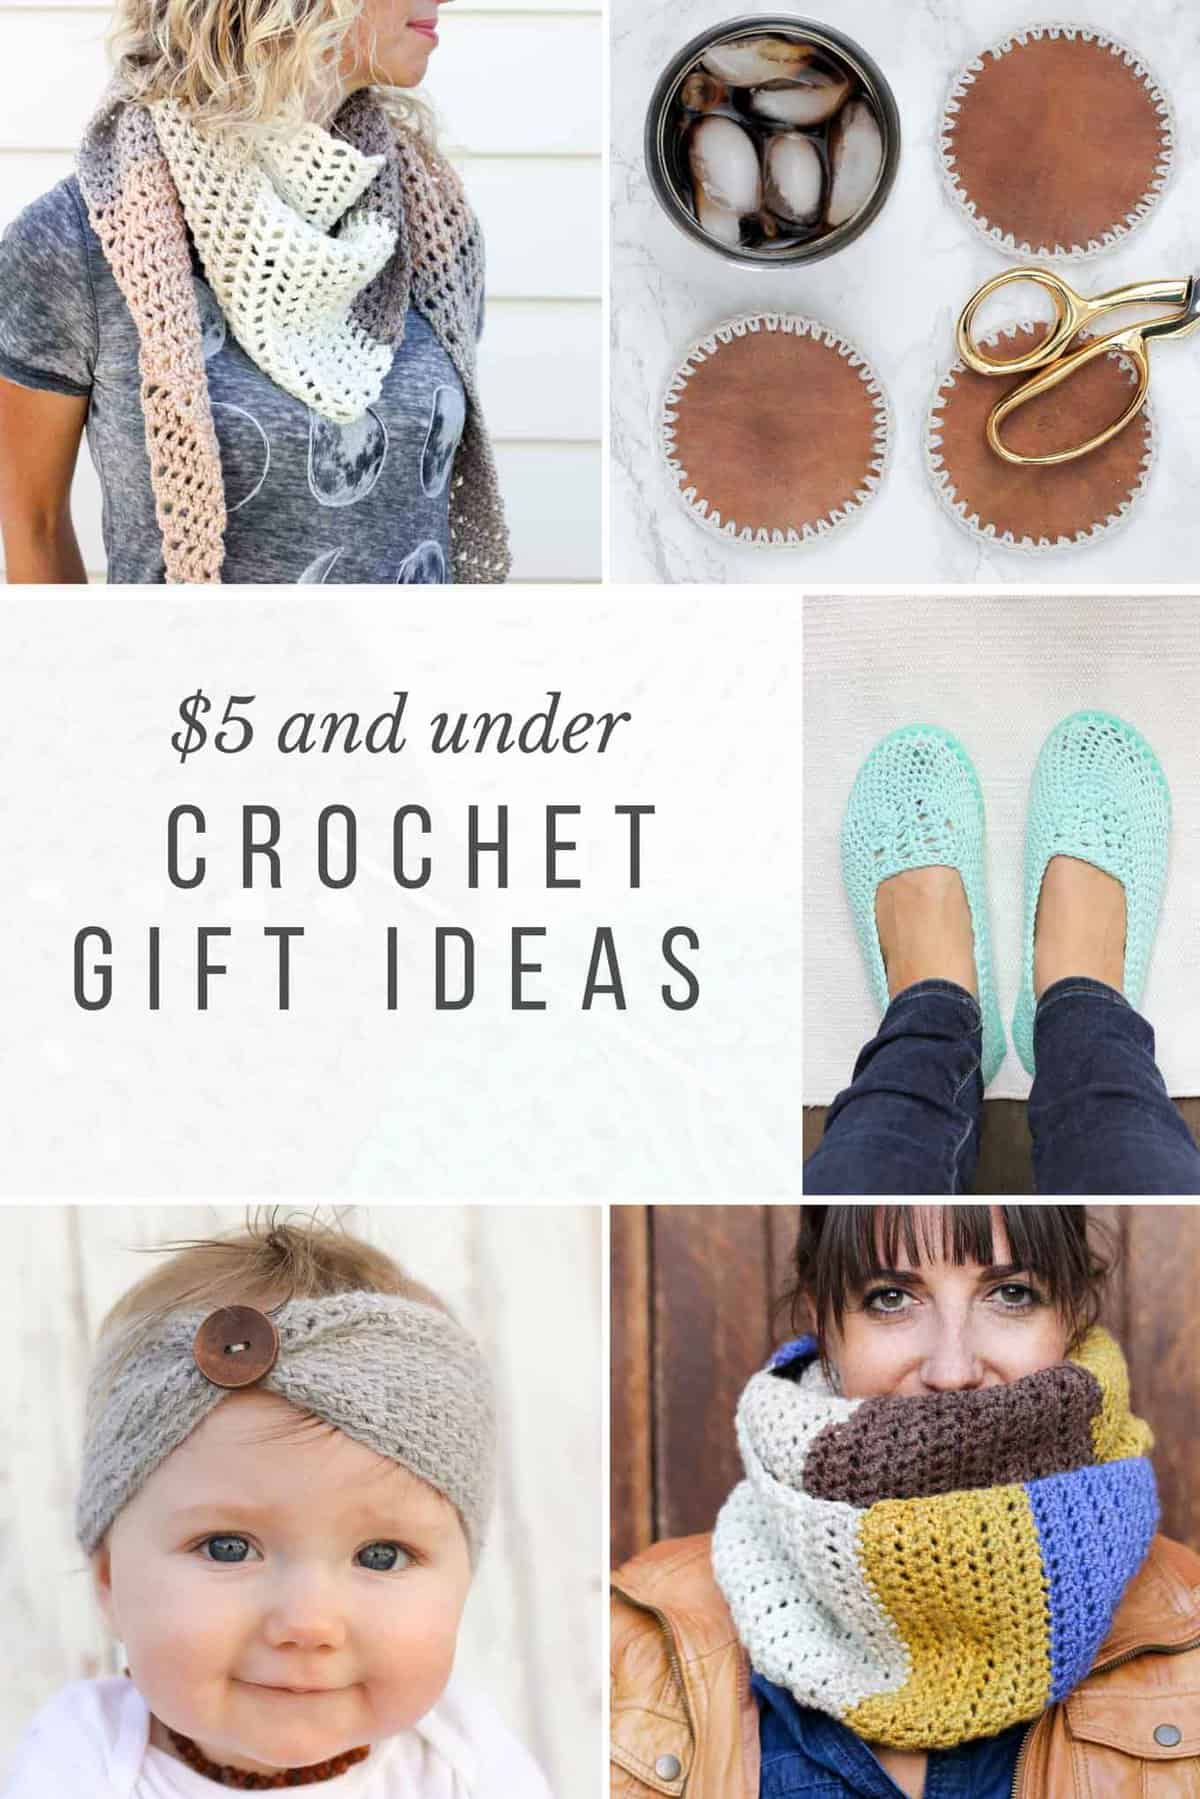 These modern crochet gift ideas can all be make for under $5, which means you can give gifts that are thoughtful, stylish AND inexpensive. Click to view the free patterns.